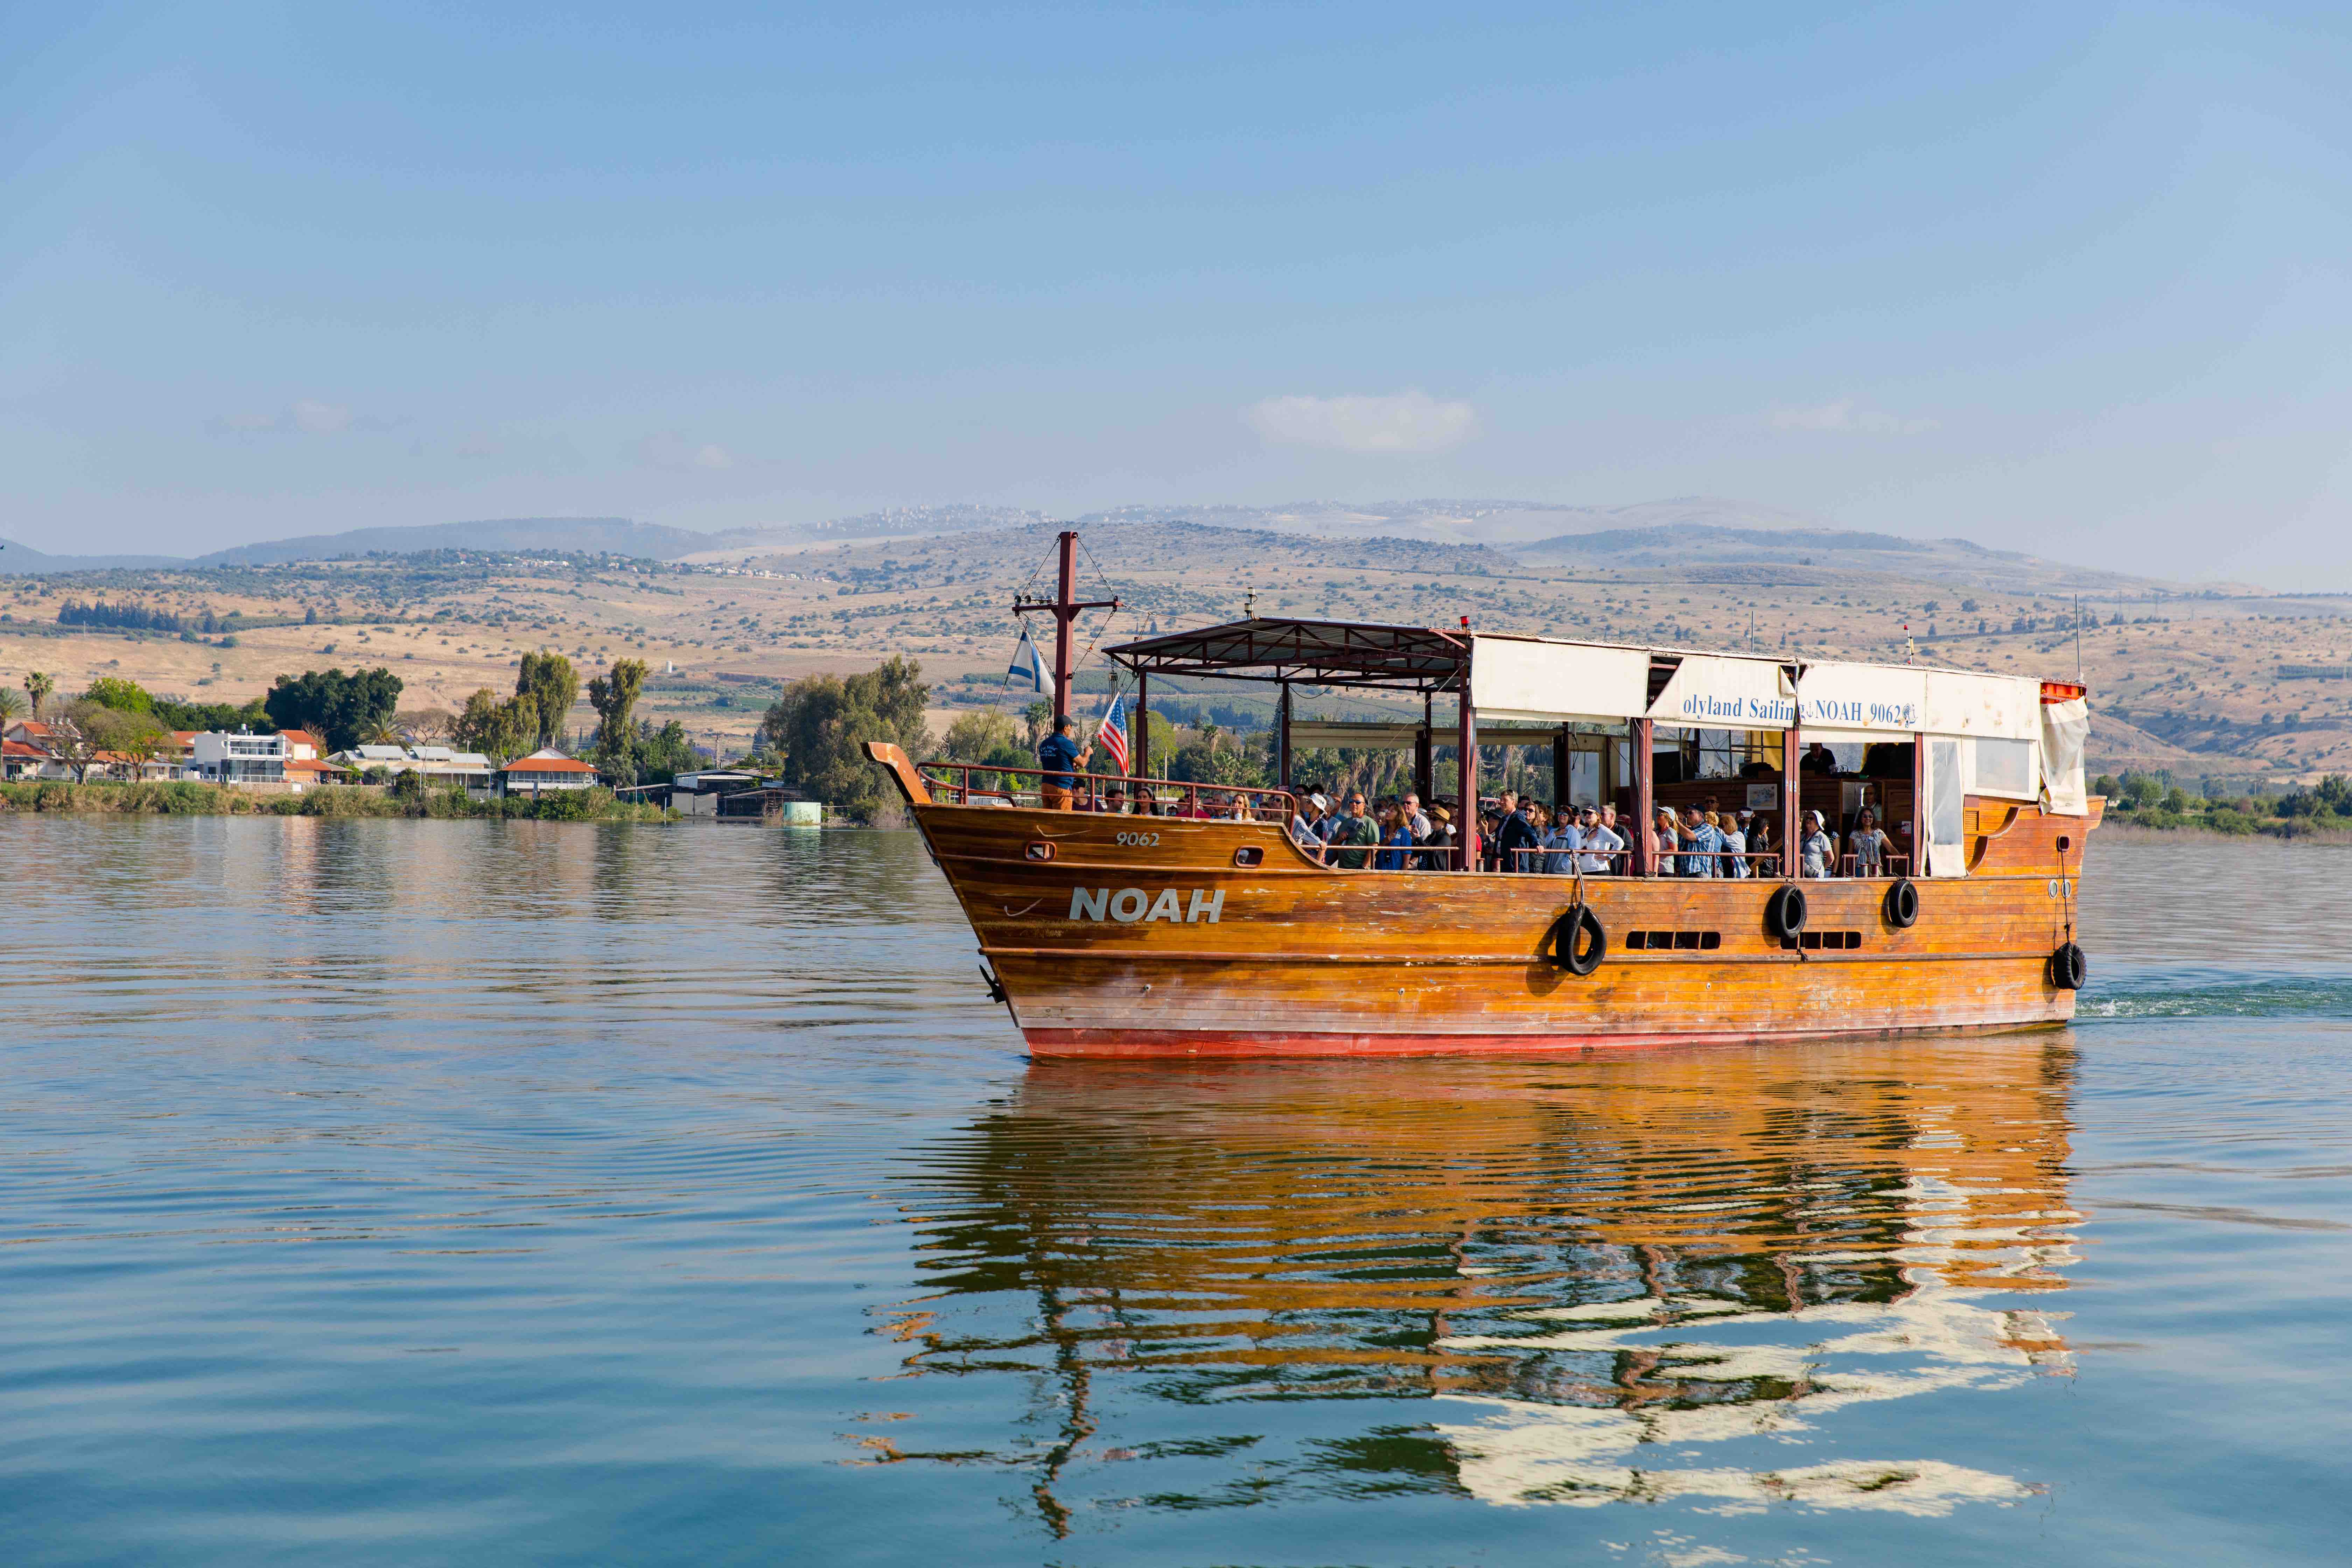 Boat floating on the Sea of Galilee